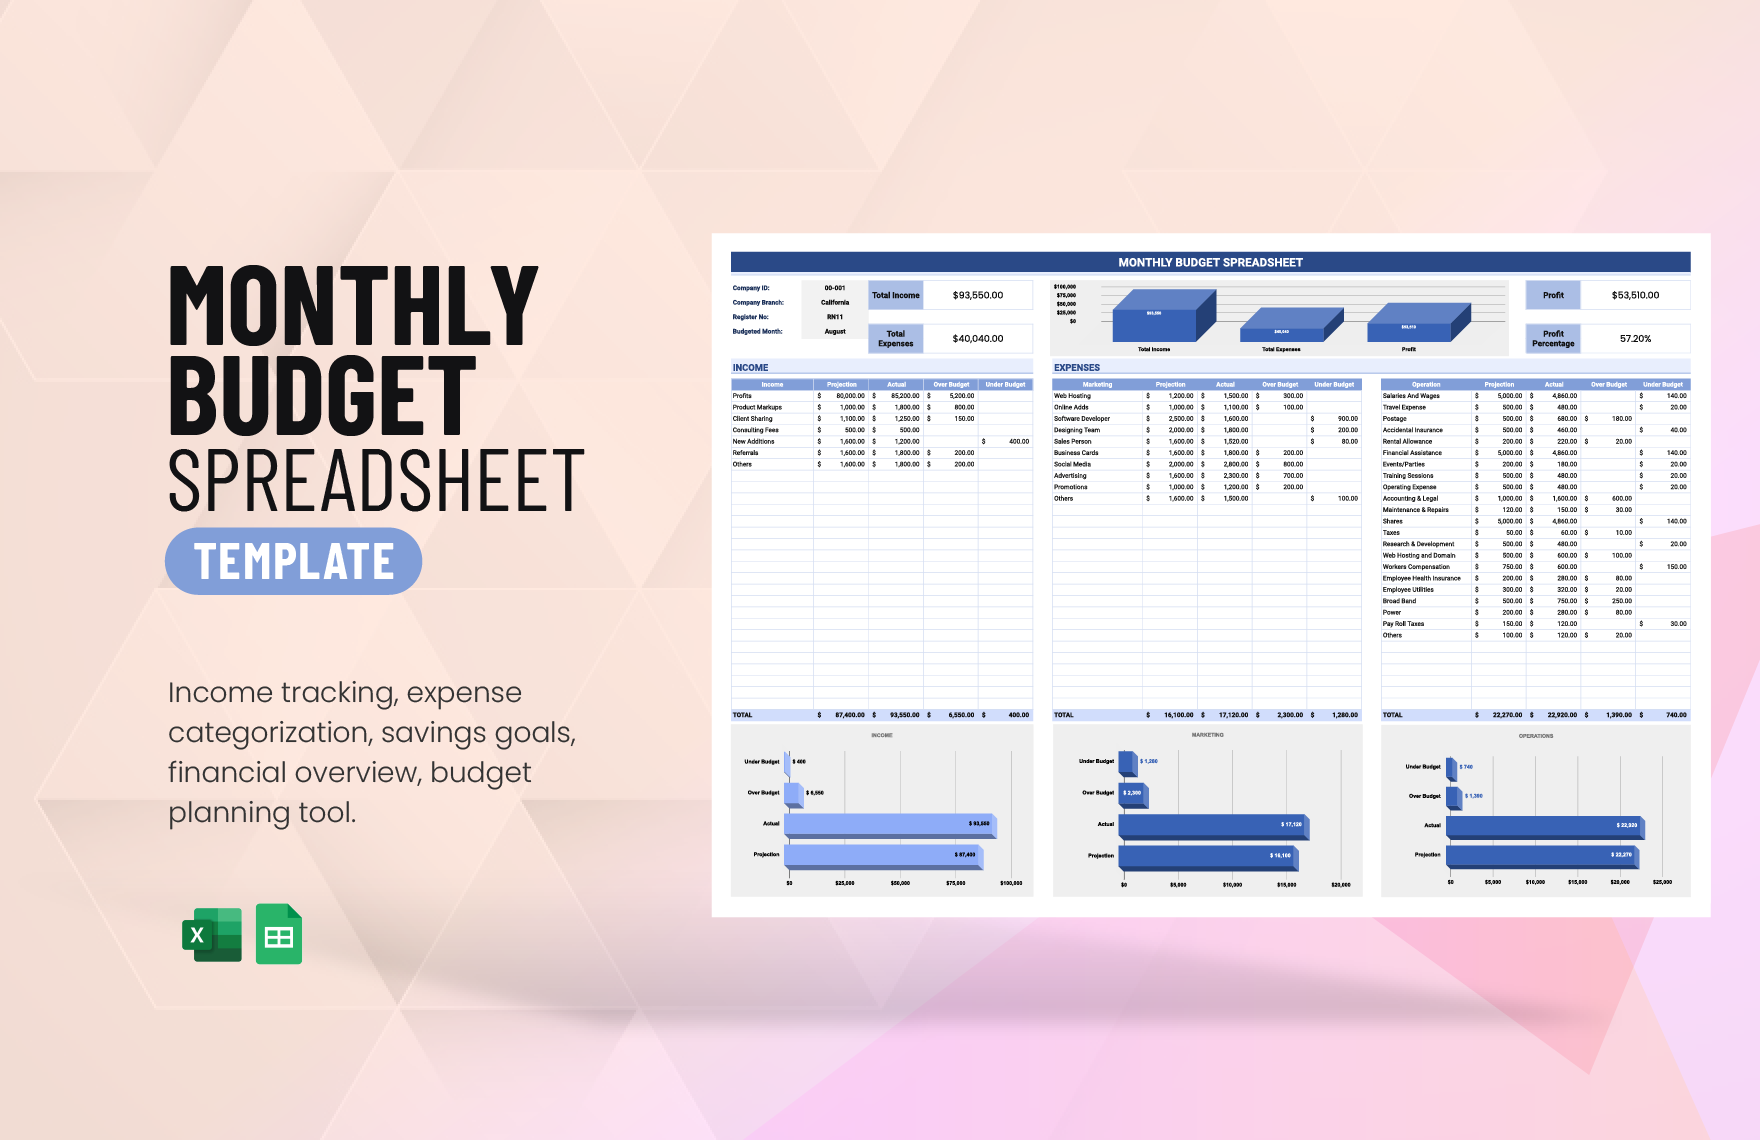 Monthly Budget Spreadsheet Template in Excel, Google Sheets